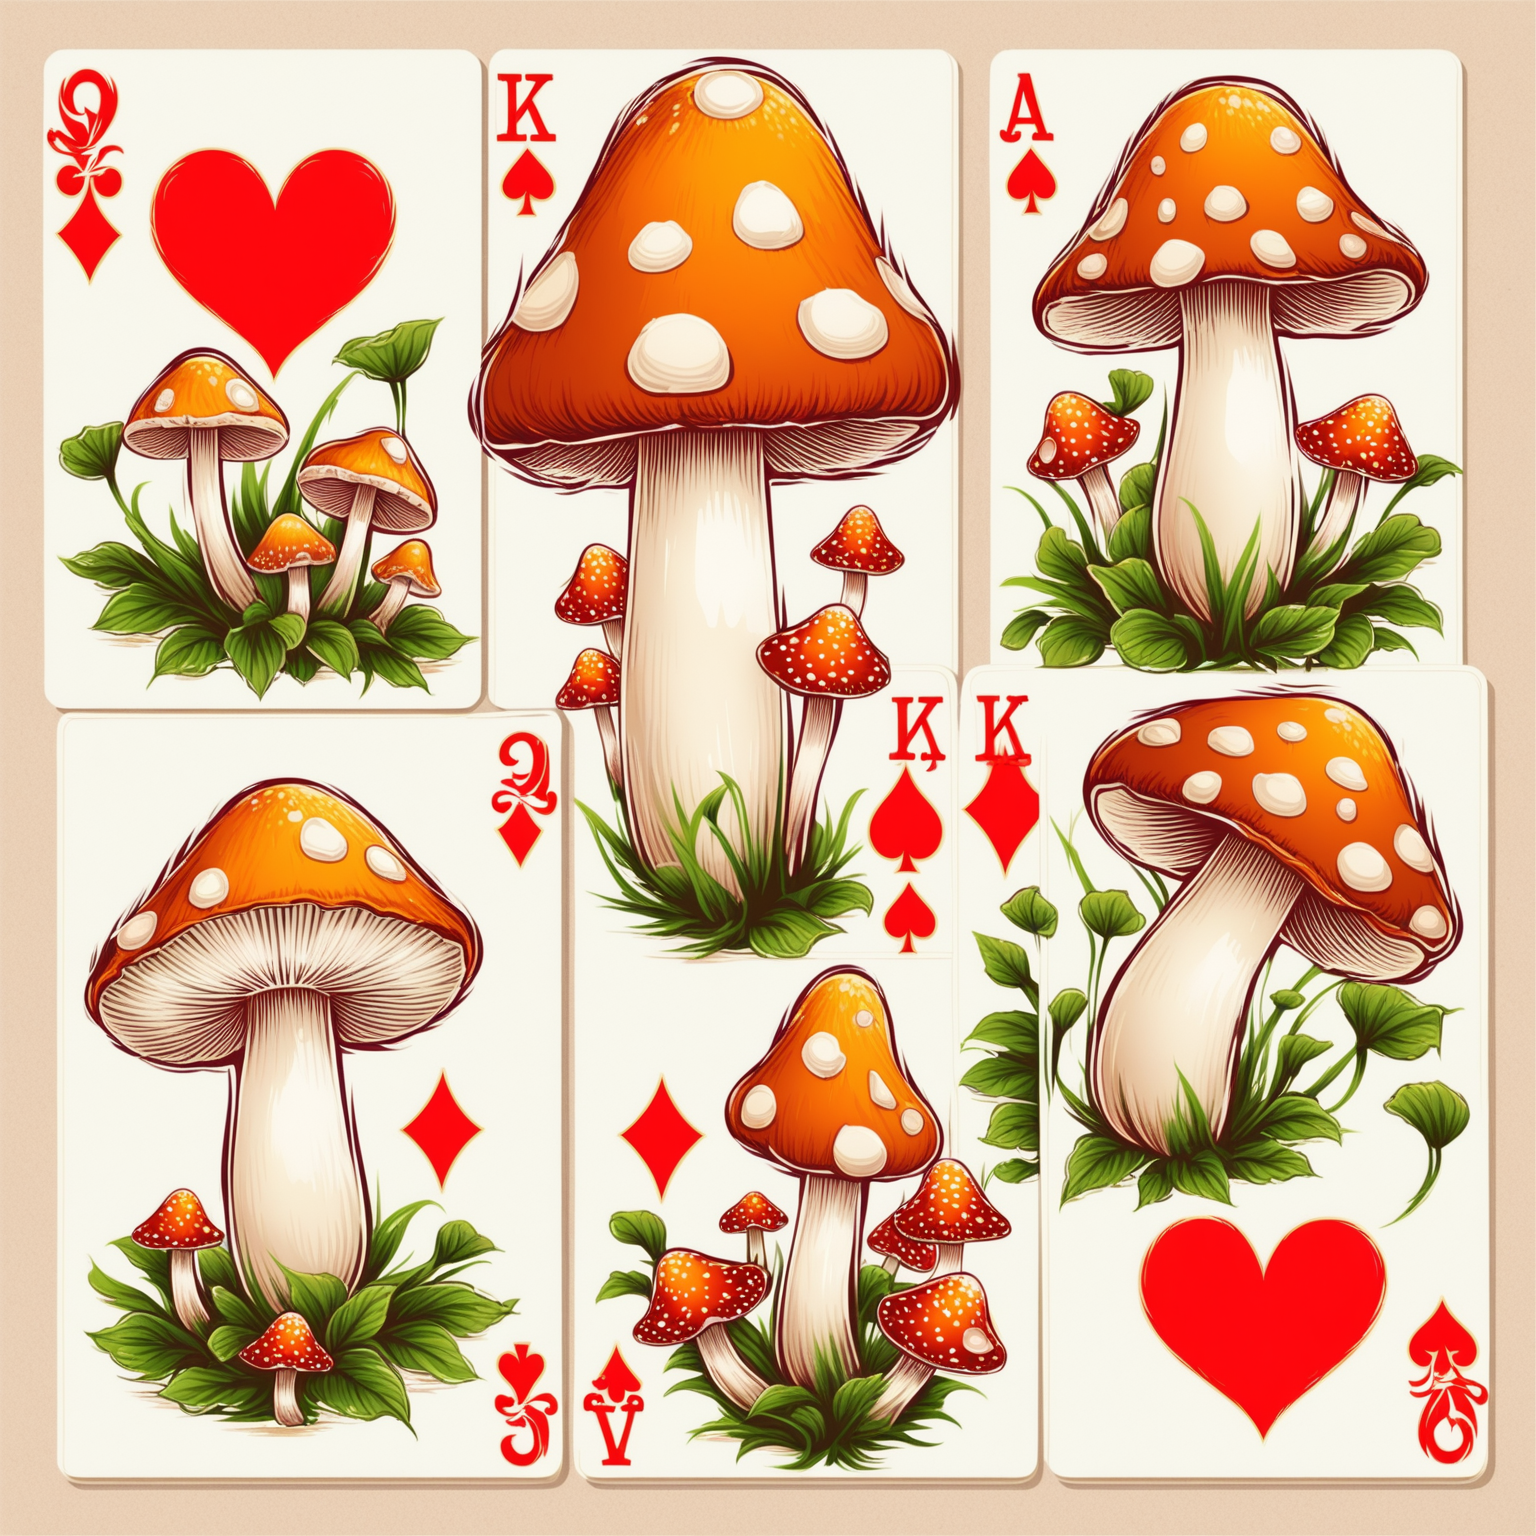 Royal Flush of Mushrooms Five Playing Cards Forming a Whimsical Arrangement